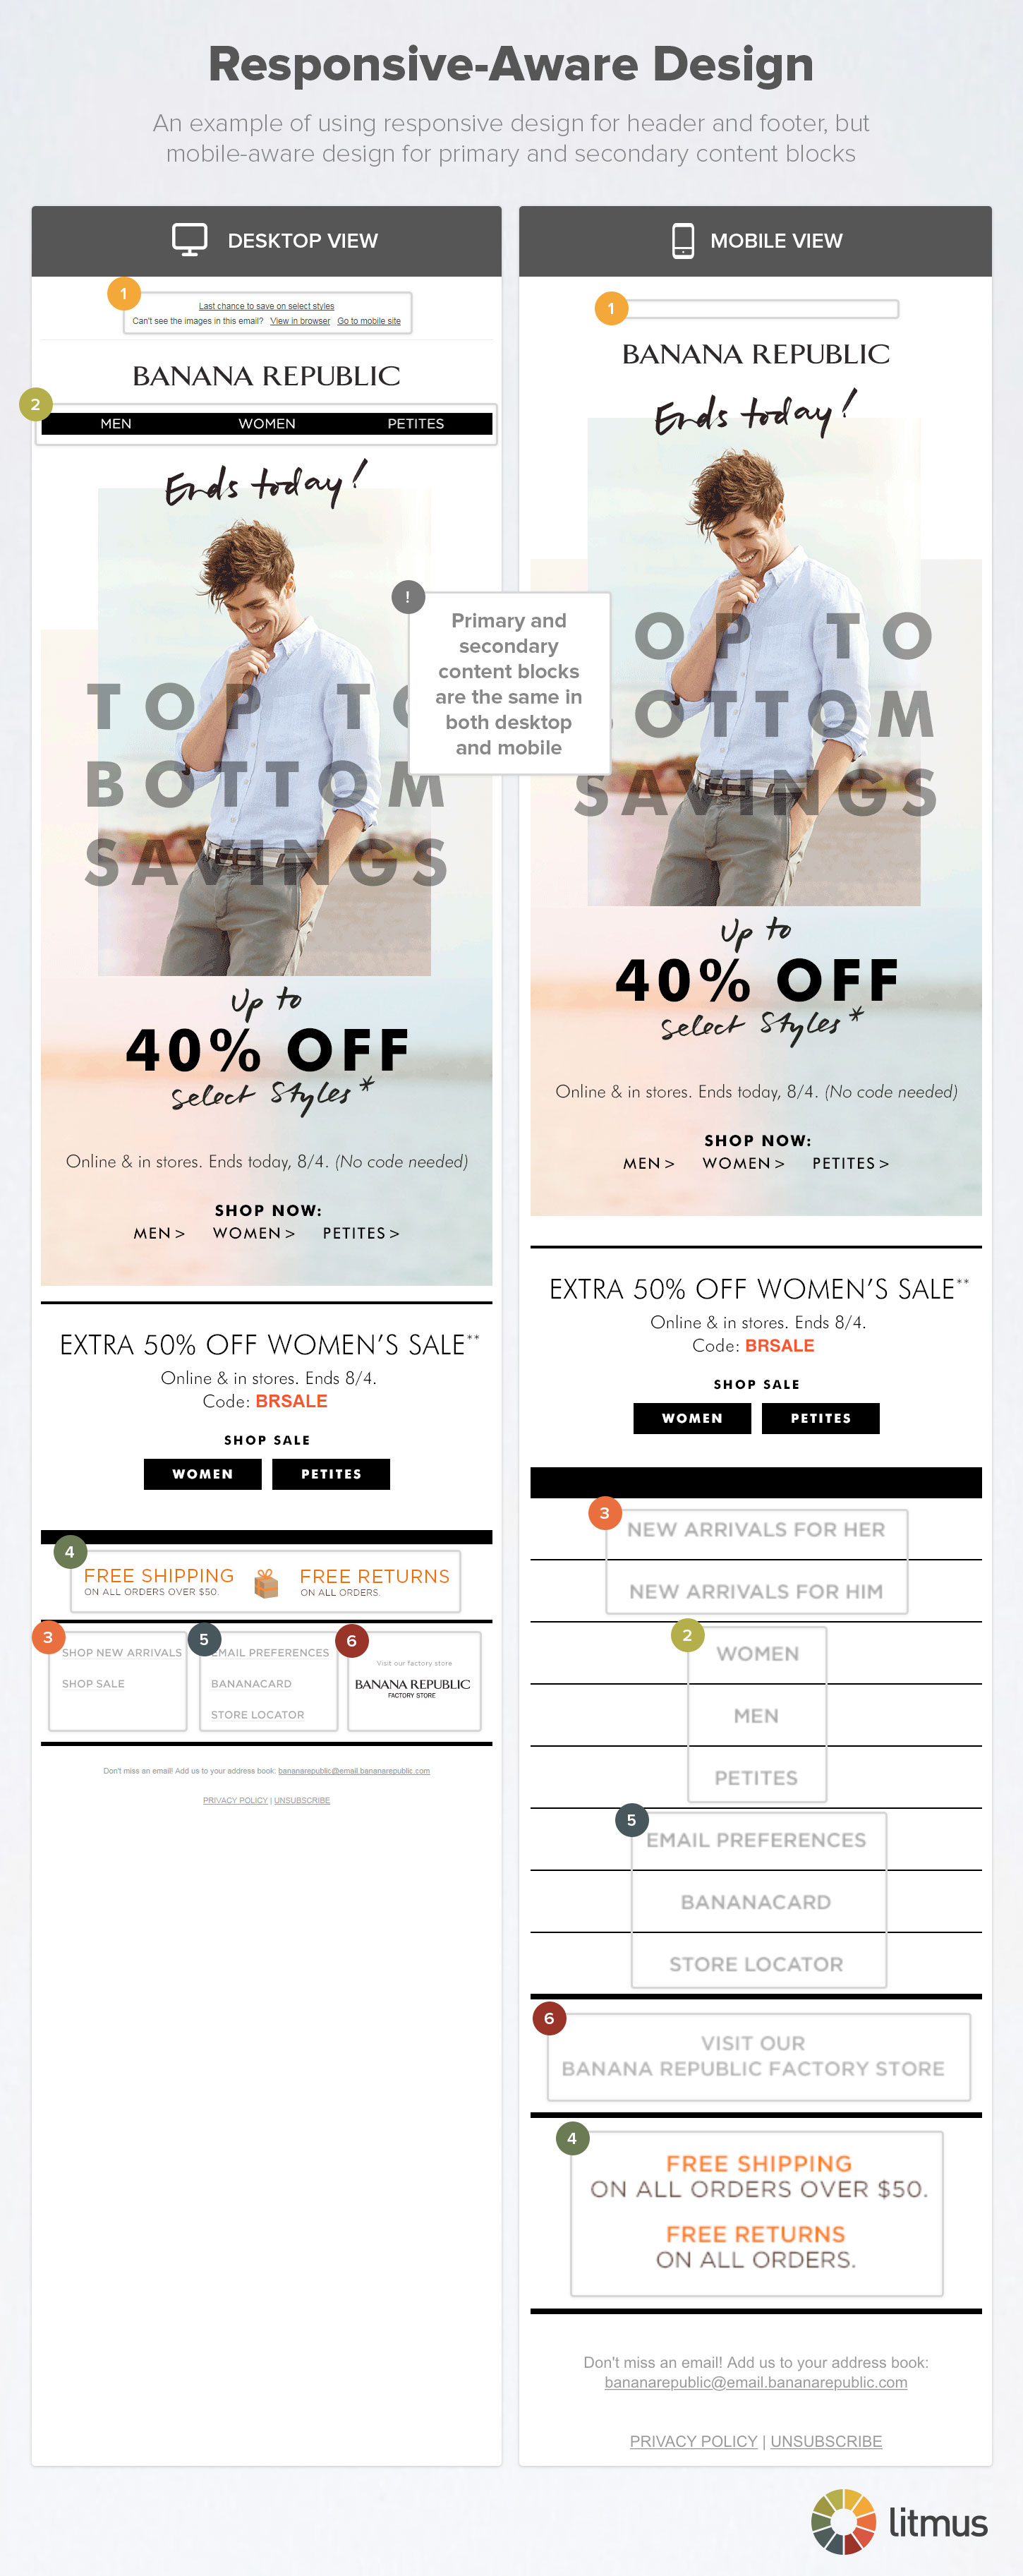 The growing appeal of responsive-aware email design - Example of responsive-aware email design in action